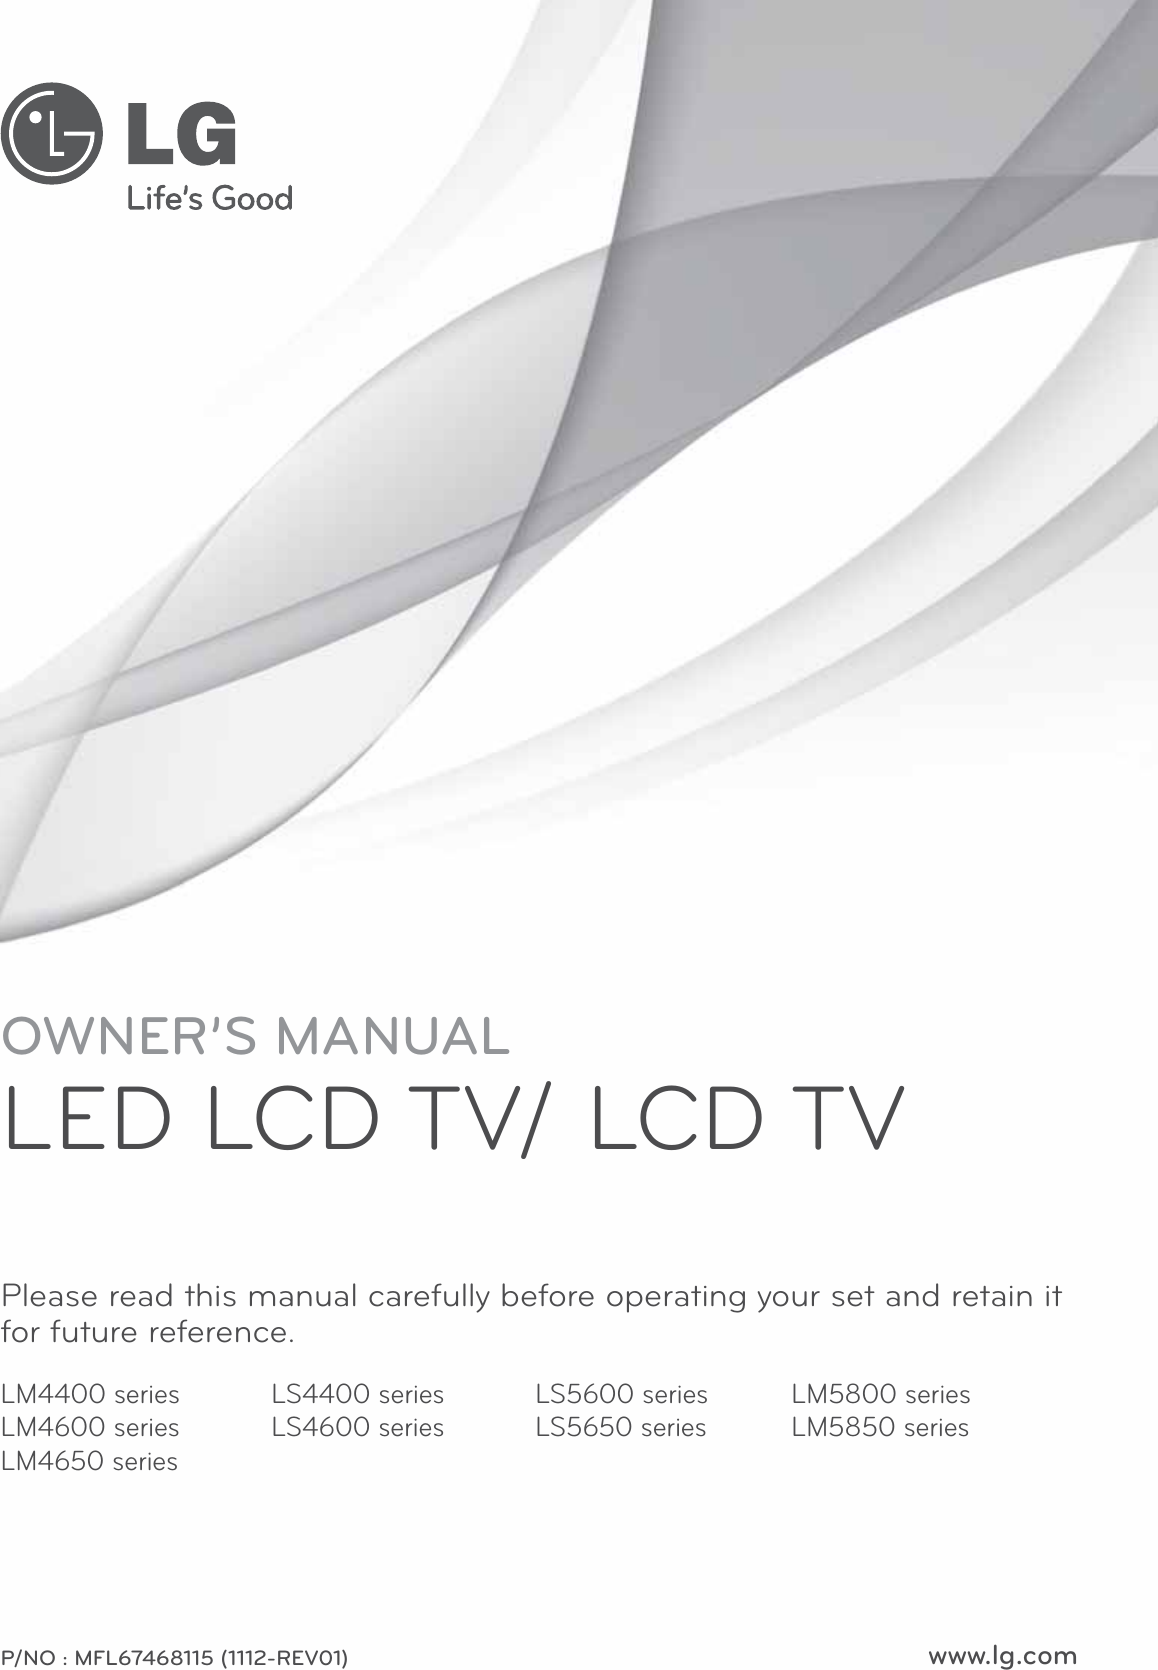 www.lg.comOWNER’S MANUALLED LCD TV/ LCD TVPlease read this manual carefully before operating your set and retain it for future reference.P/NO : MFL67468115 (1112-REV01)LS4400 seriesLS4600 seriesLS5600 seriesLS5650 seriesLM5800 seriesLM5850 seriesLM4400 seriesLM4600 seriesLM4650 series